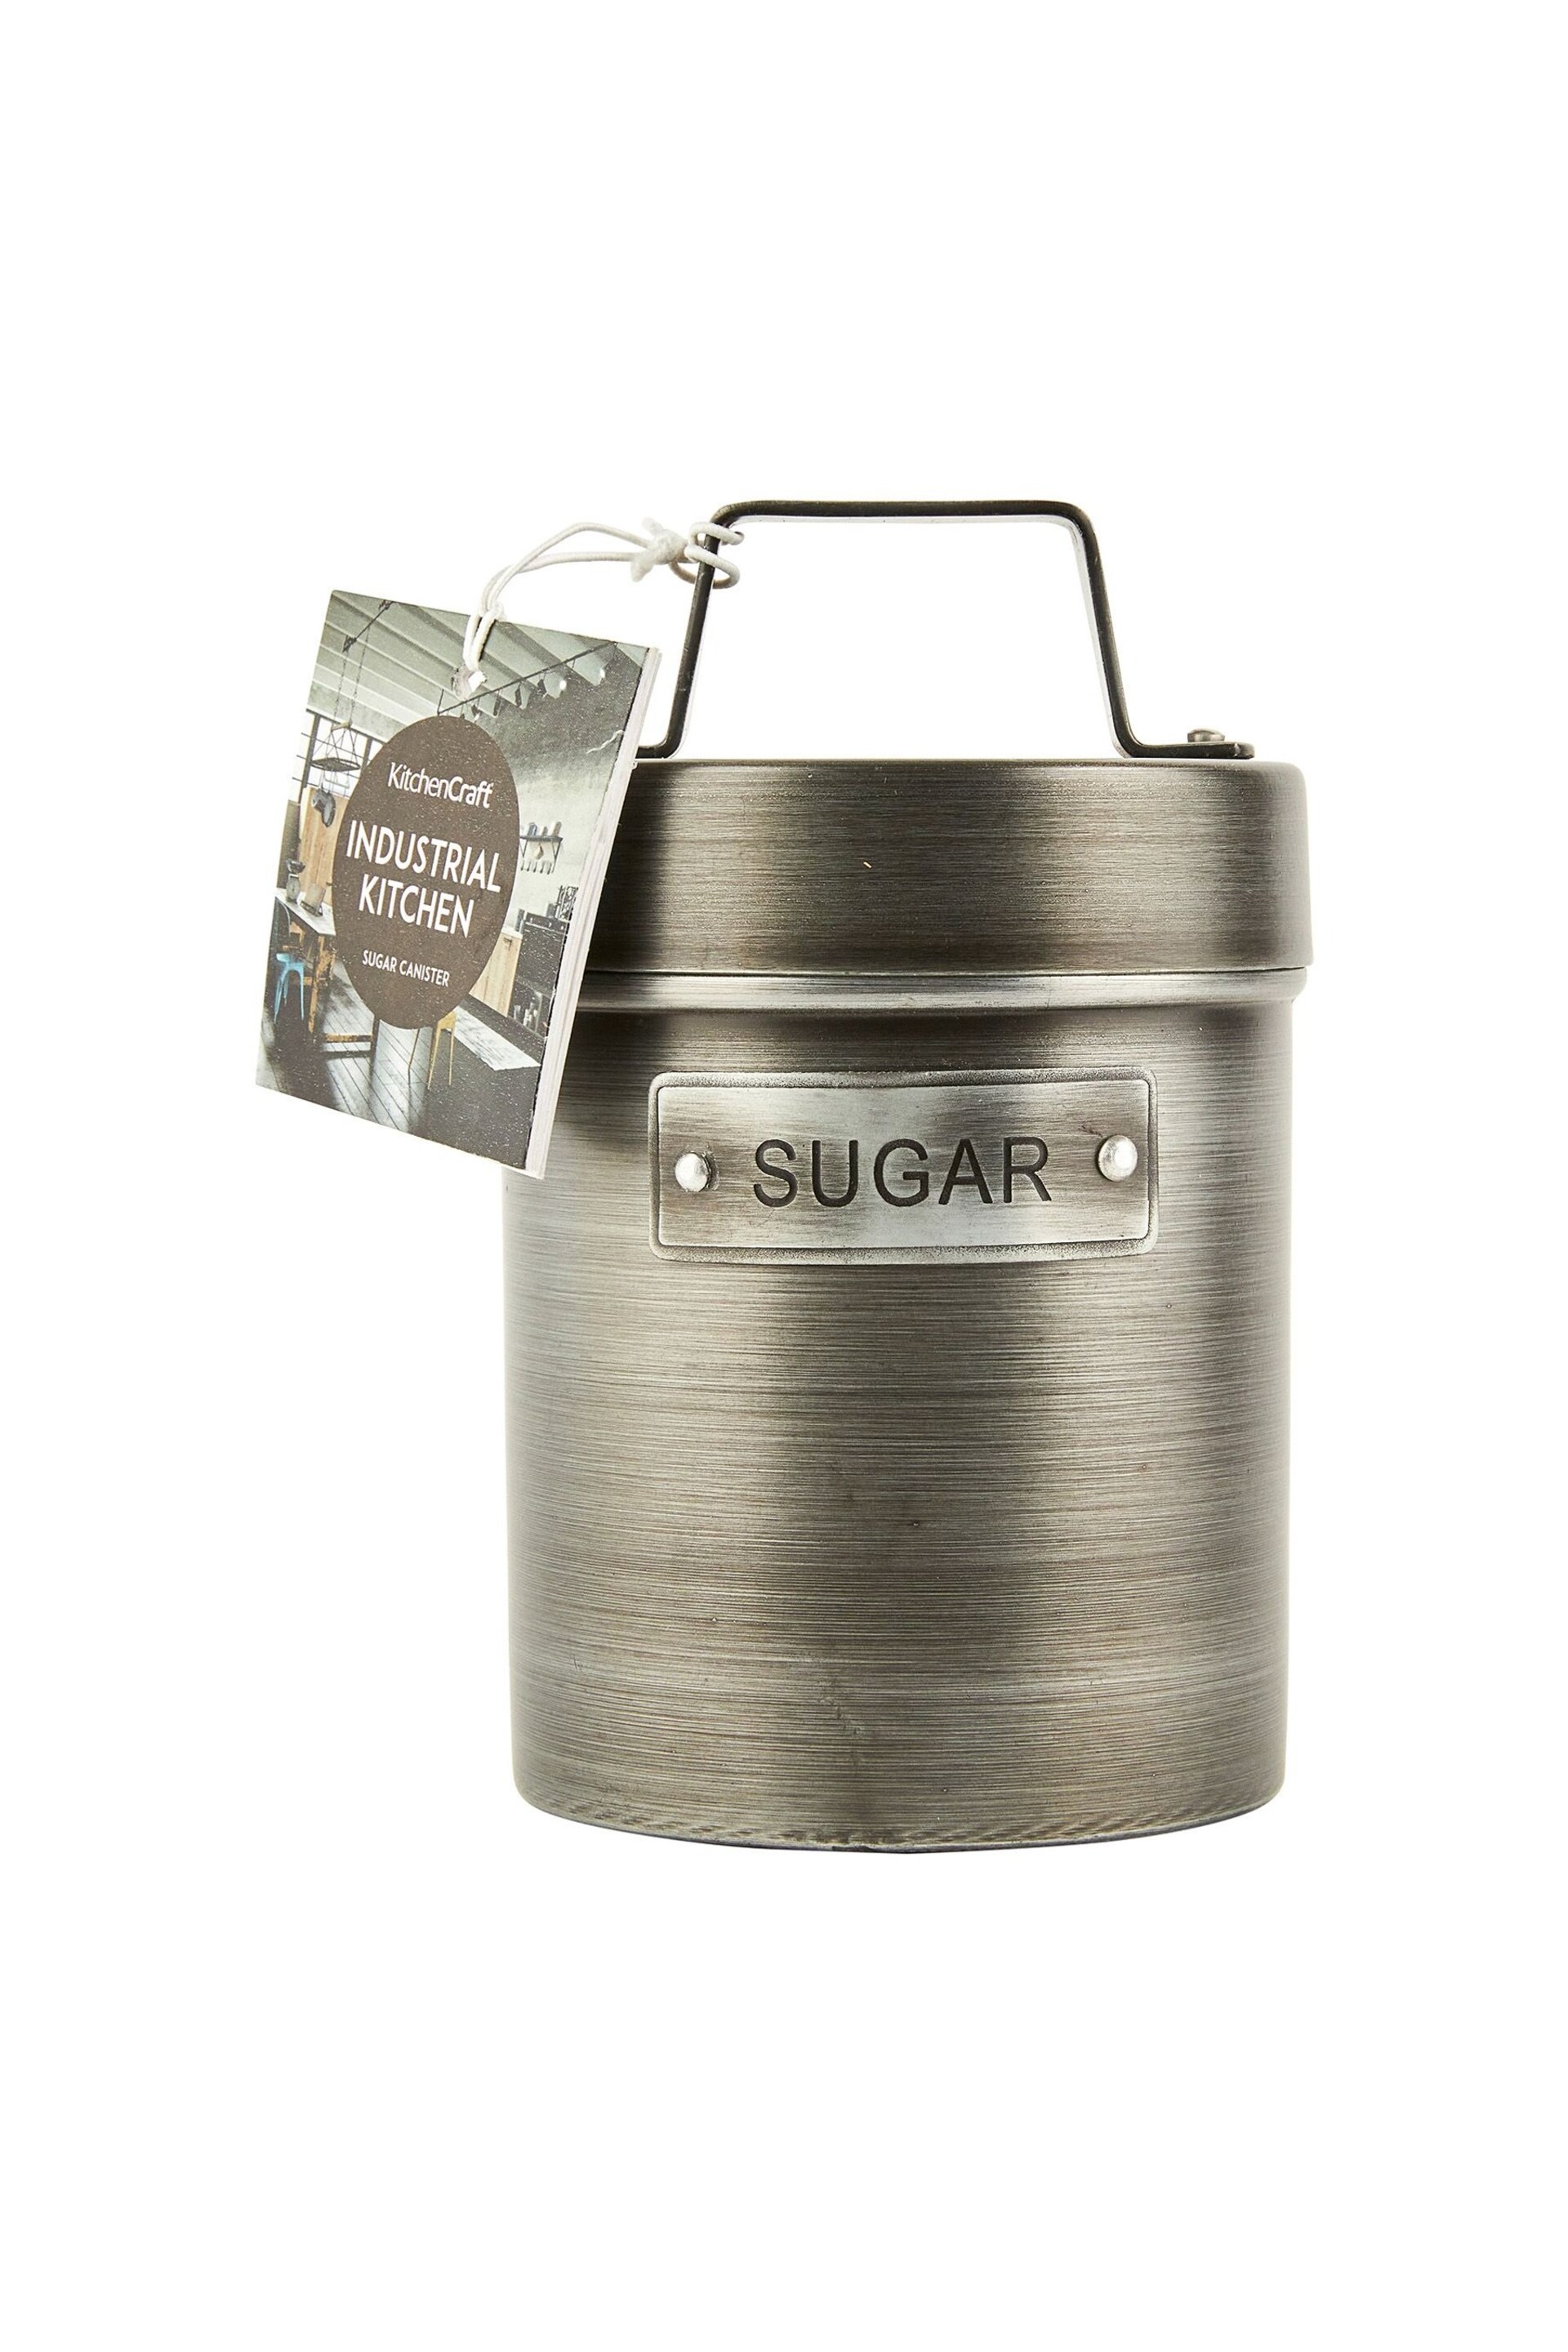 Industrial Kitchen Grey Sugar Canister - Image 3 of 3